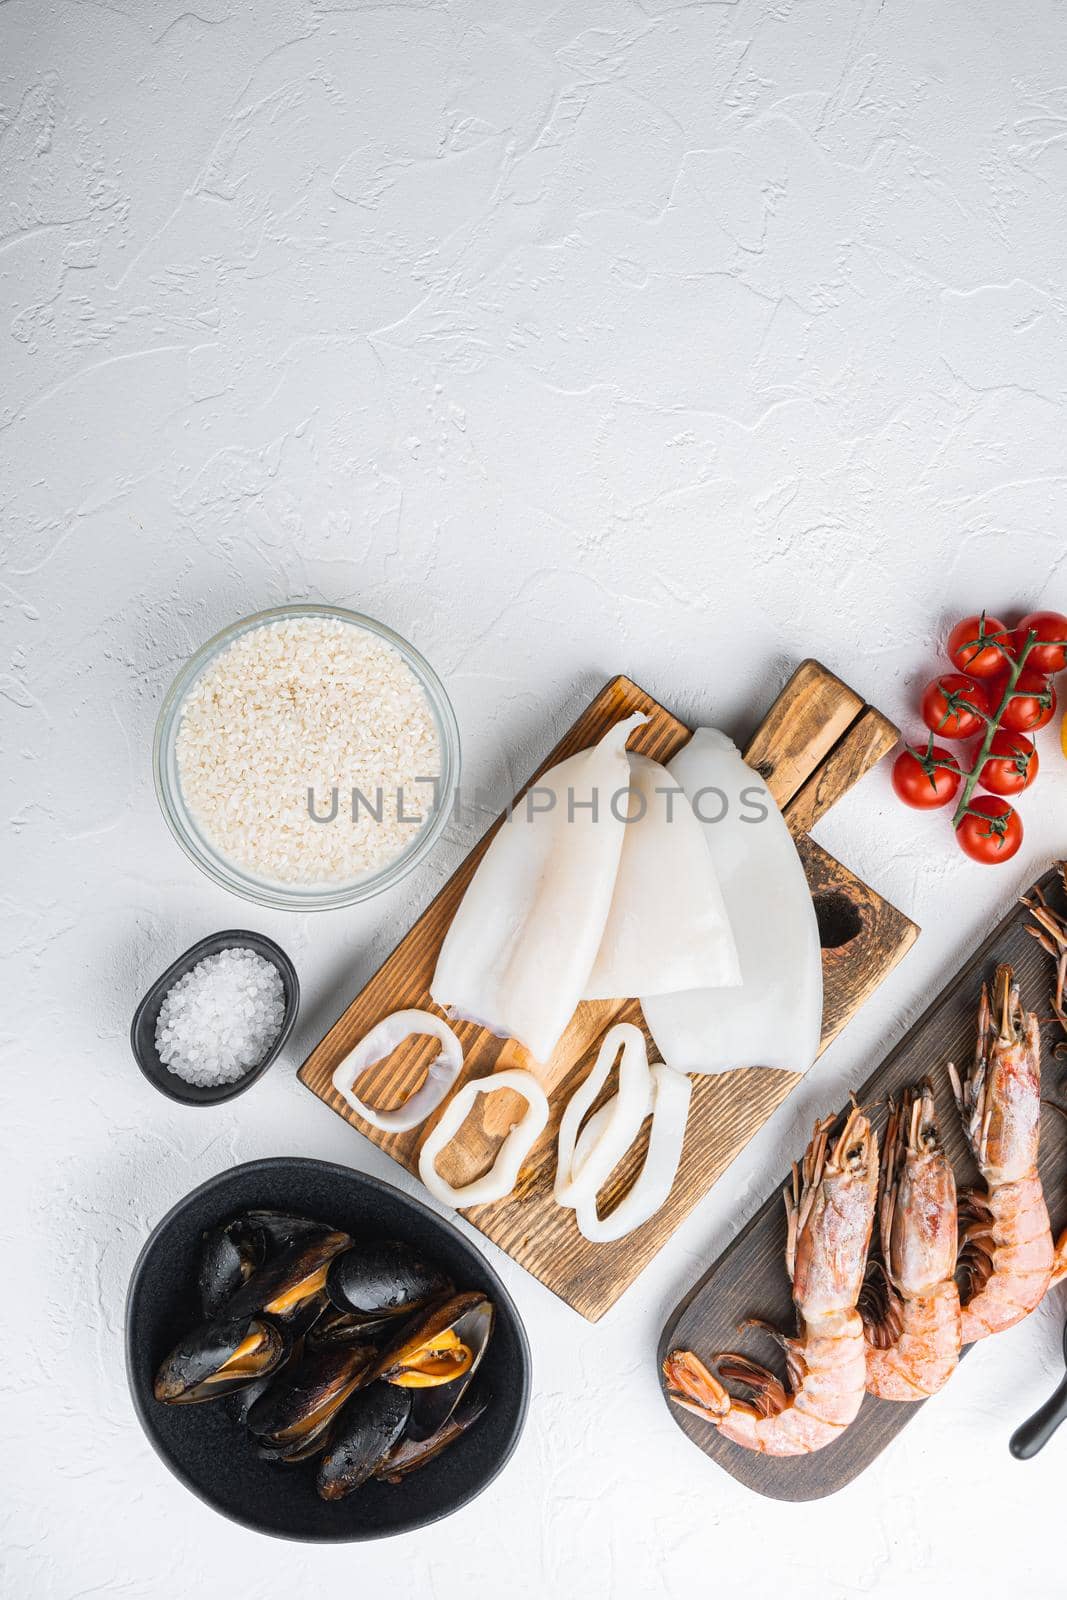 Raw ingredients for paella with seafood on white background, top view with space for text, food photo.